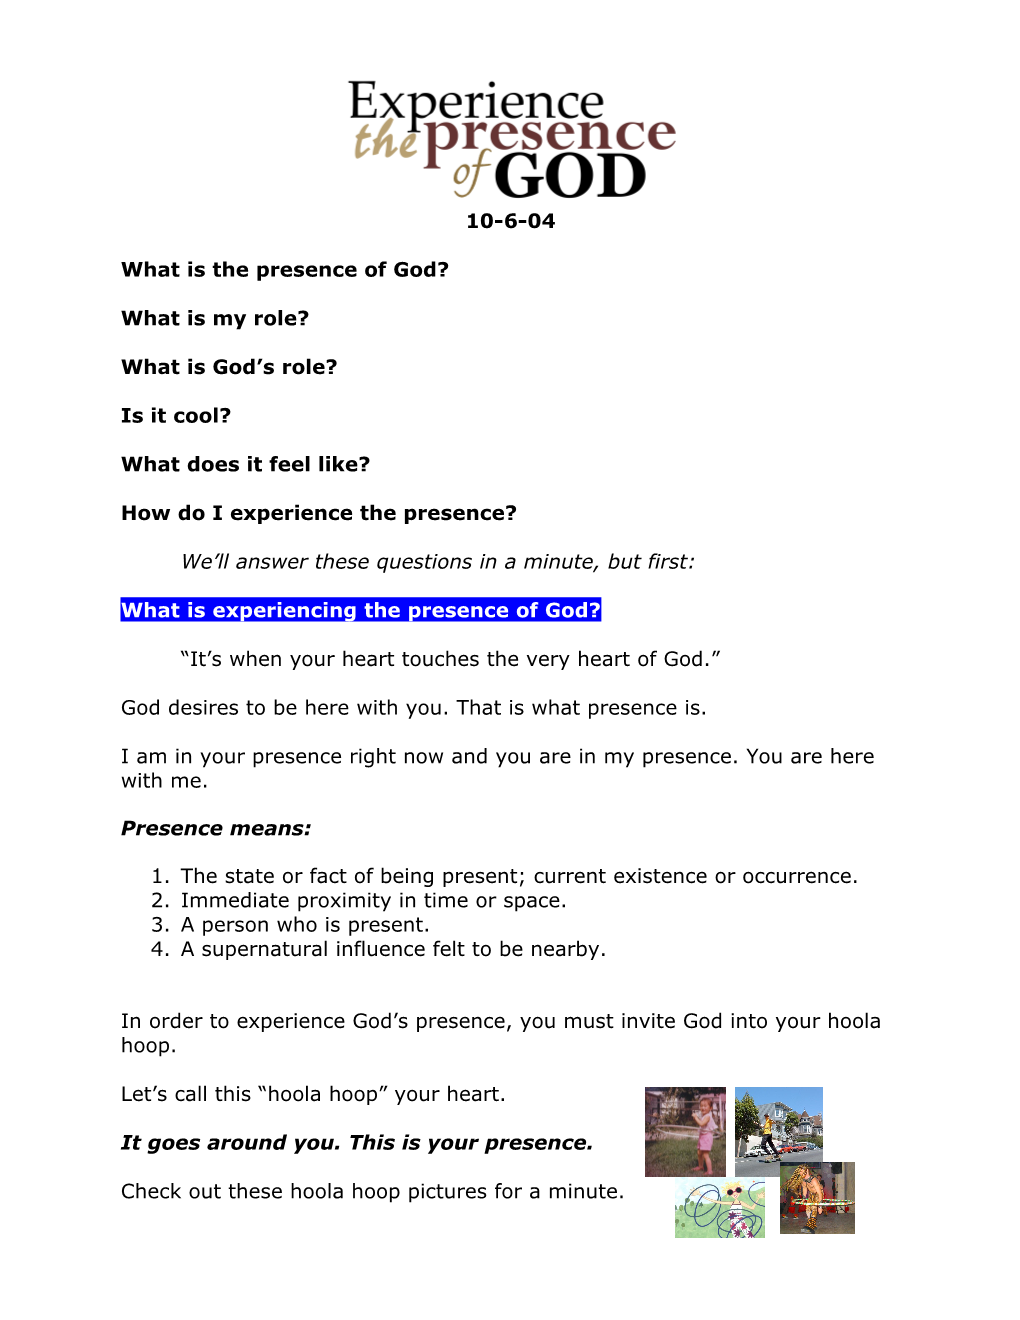 Experience the Presence of God Part 1